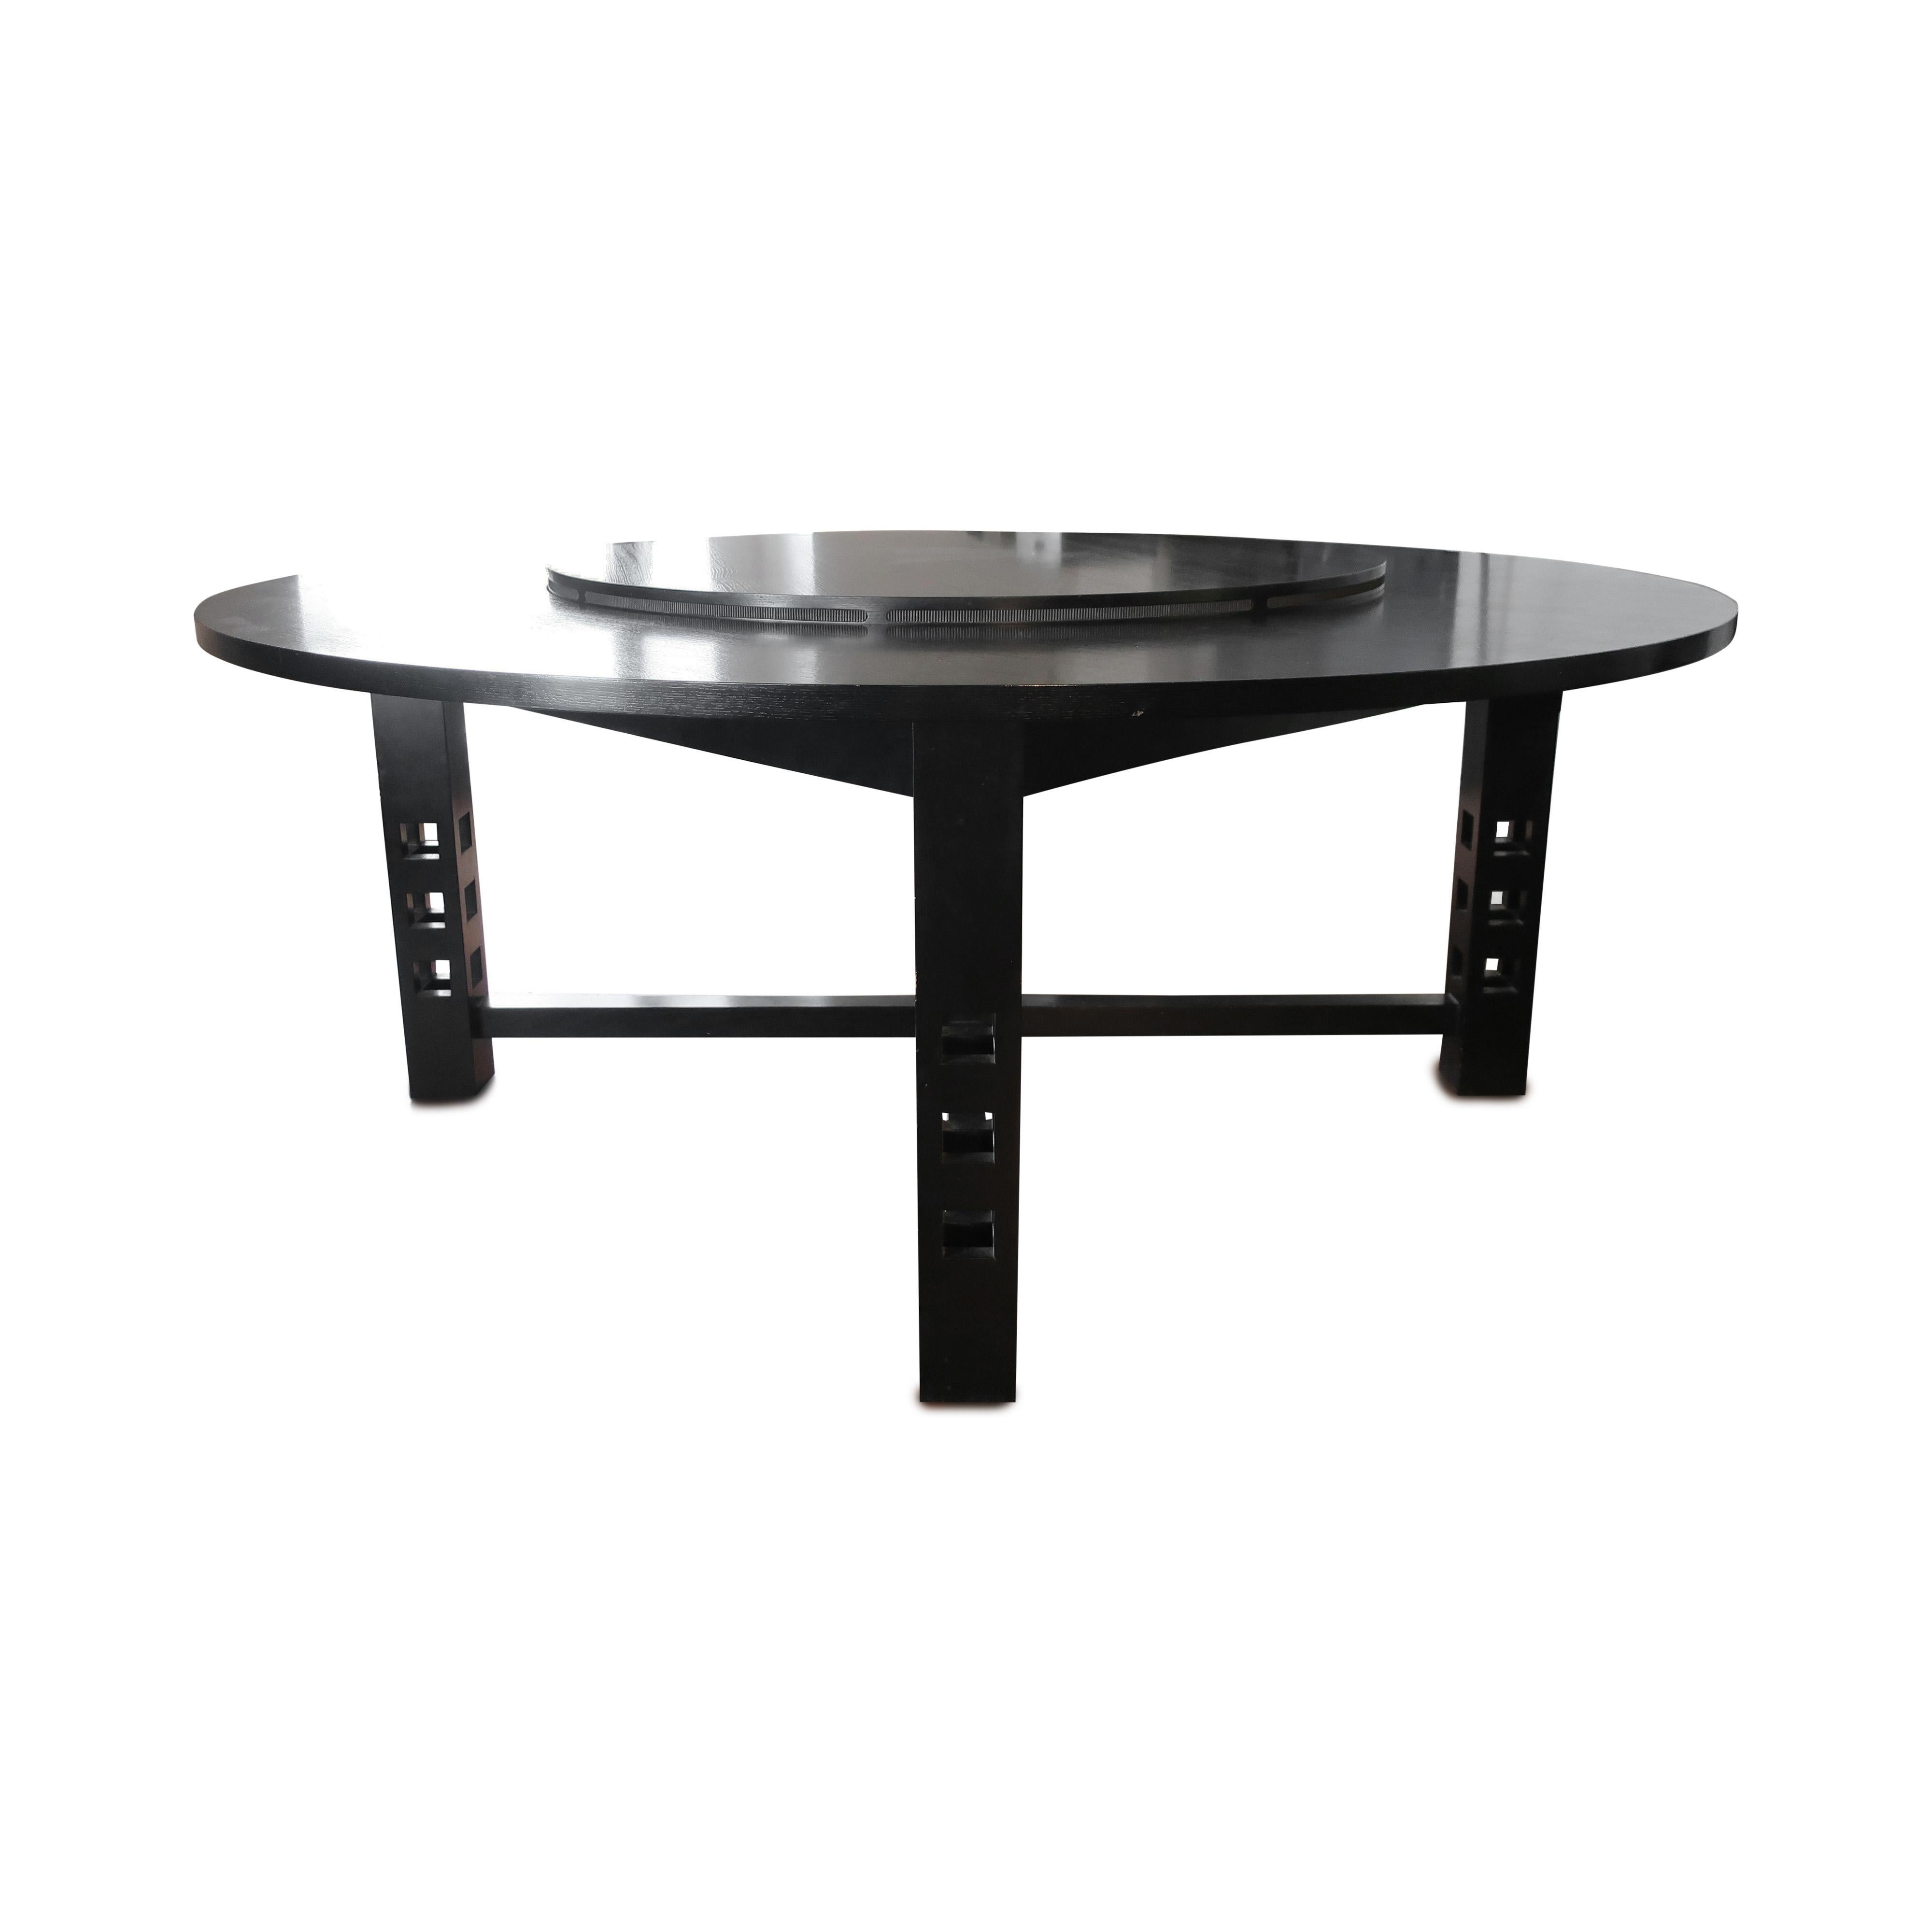 20th Century Ebonized Ash 304 Dining Table by Charles Rennie Mackintosh for Cassina